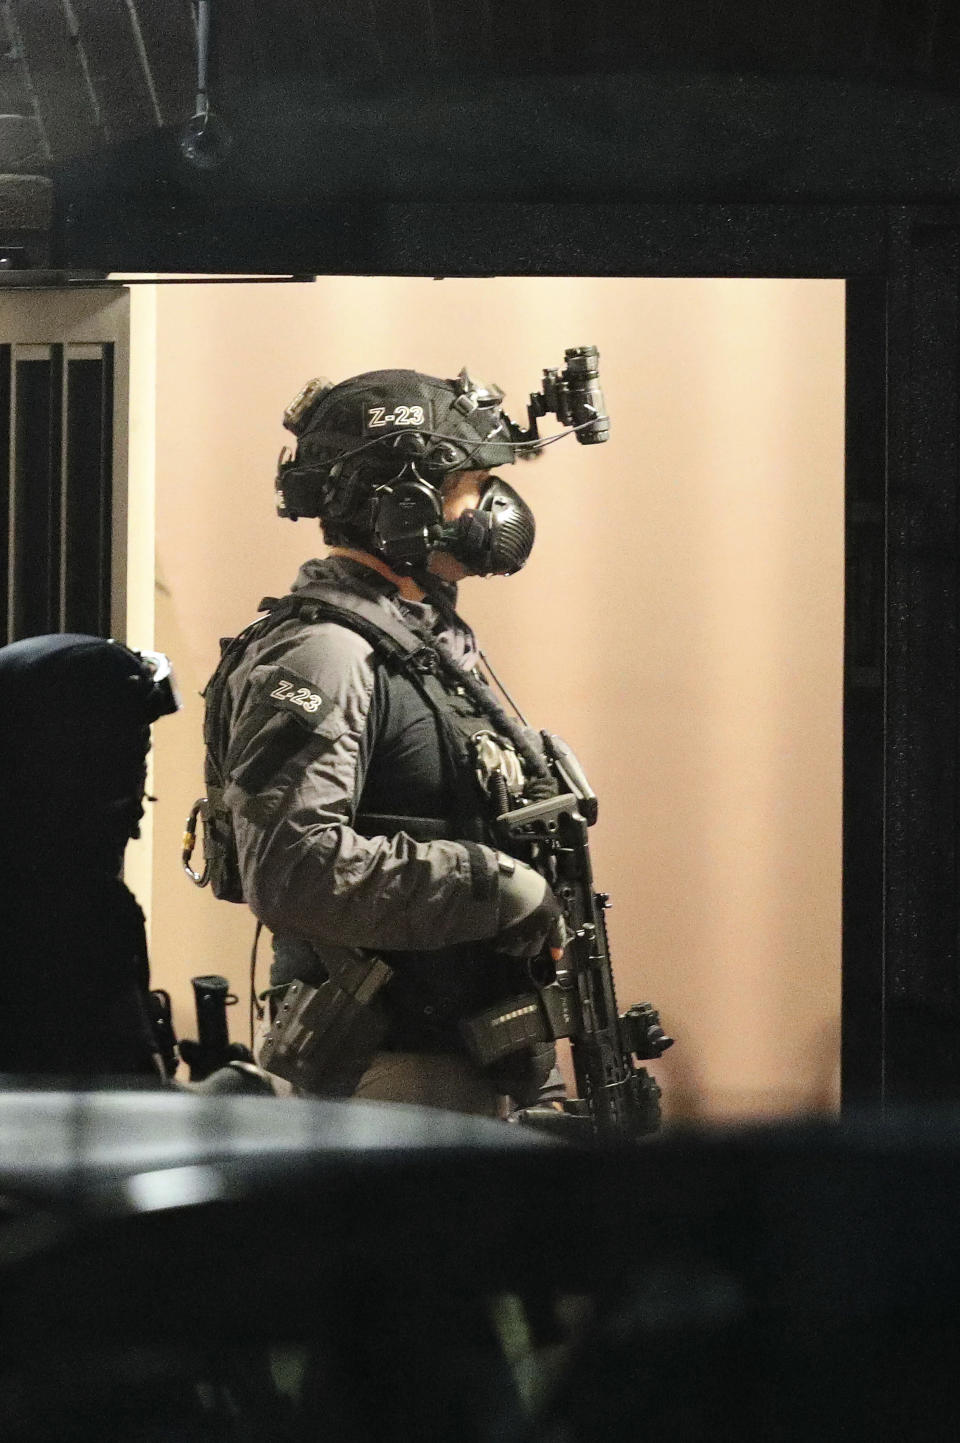 Armed police officers stand in a door at a block of flats off Basingstoke Road in Reading after an incident at Forbury Gardens park in the town centre of Reading, England, Saturday, June 20, 2020. Several people were injured in a stabbing attack in the park on Saturday, and British media said police were treating it as “terrorism-related.” (Steve Parsons/PA via AP)